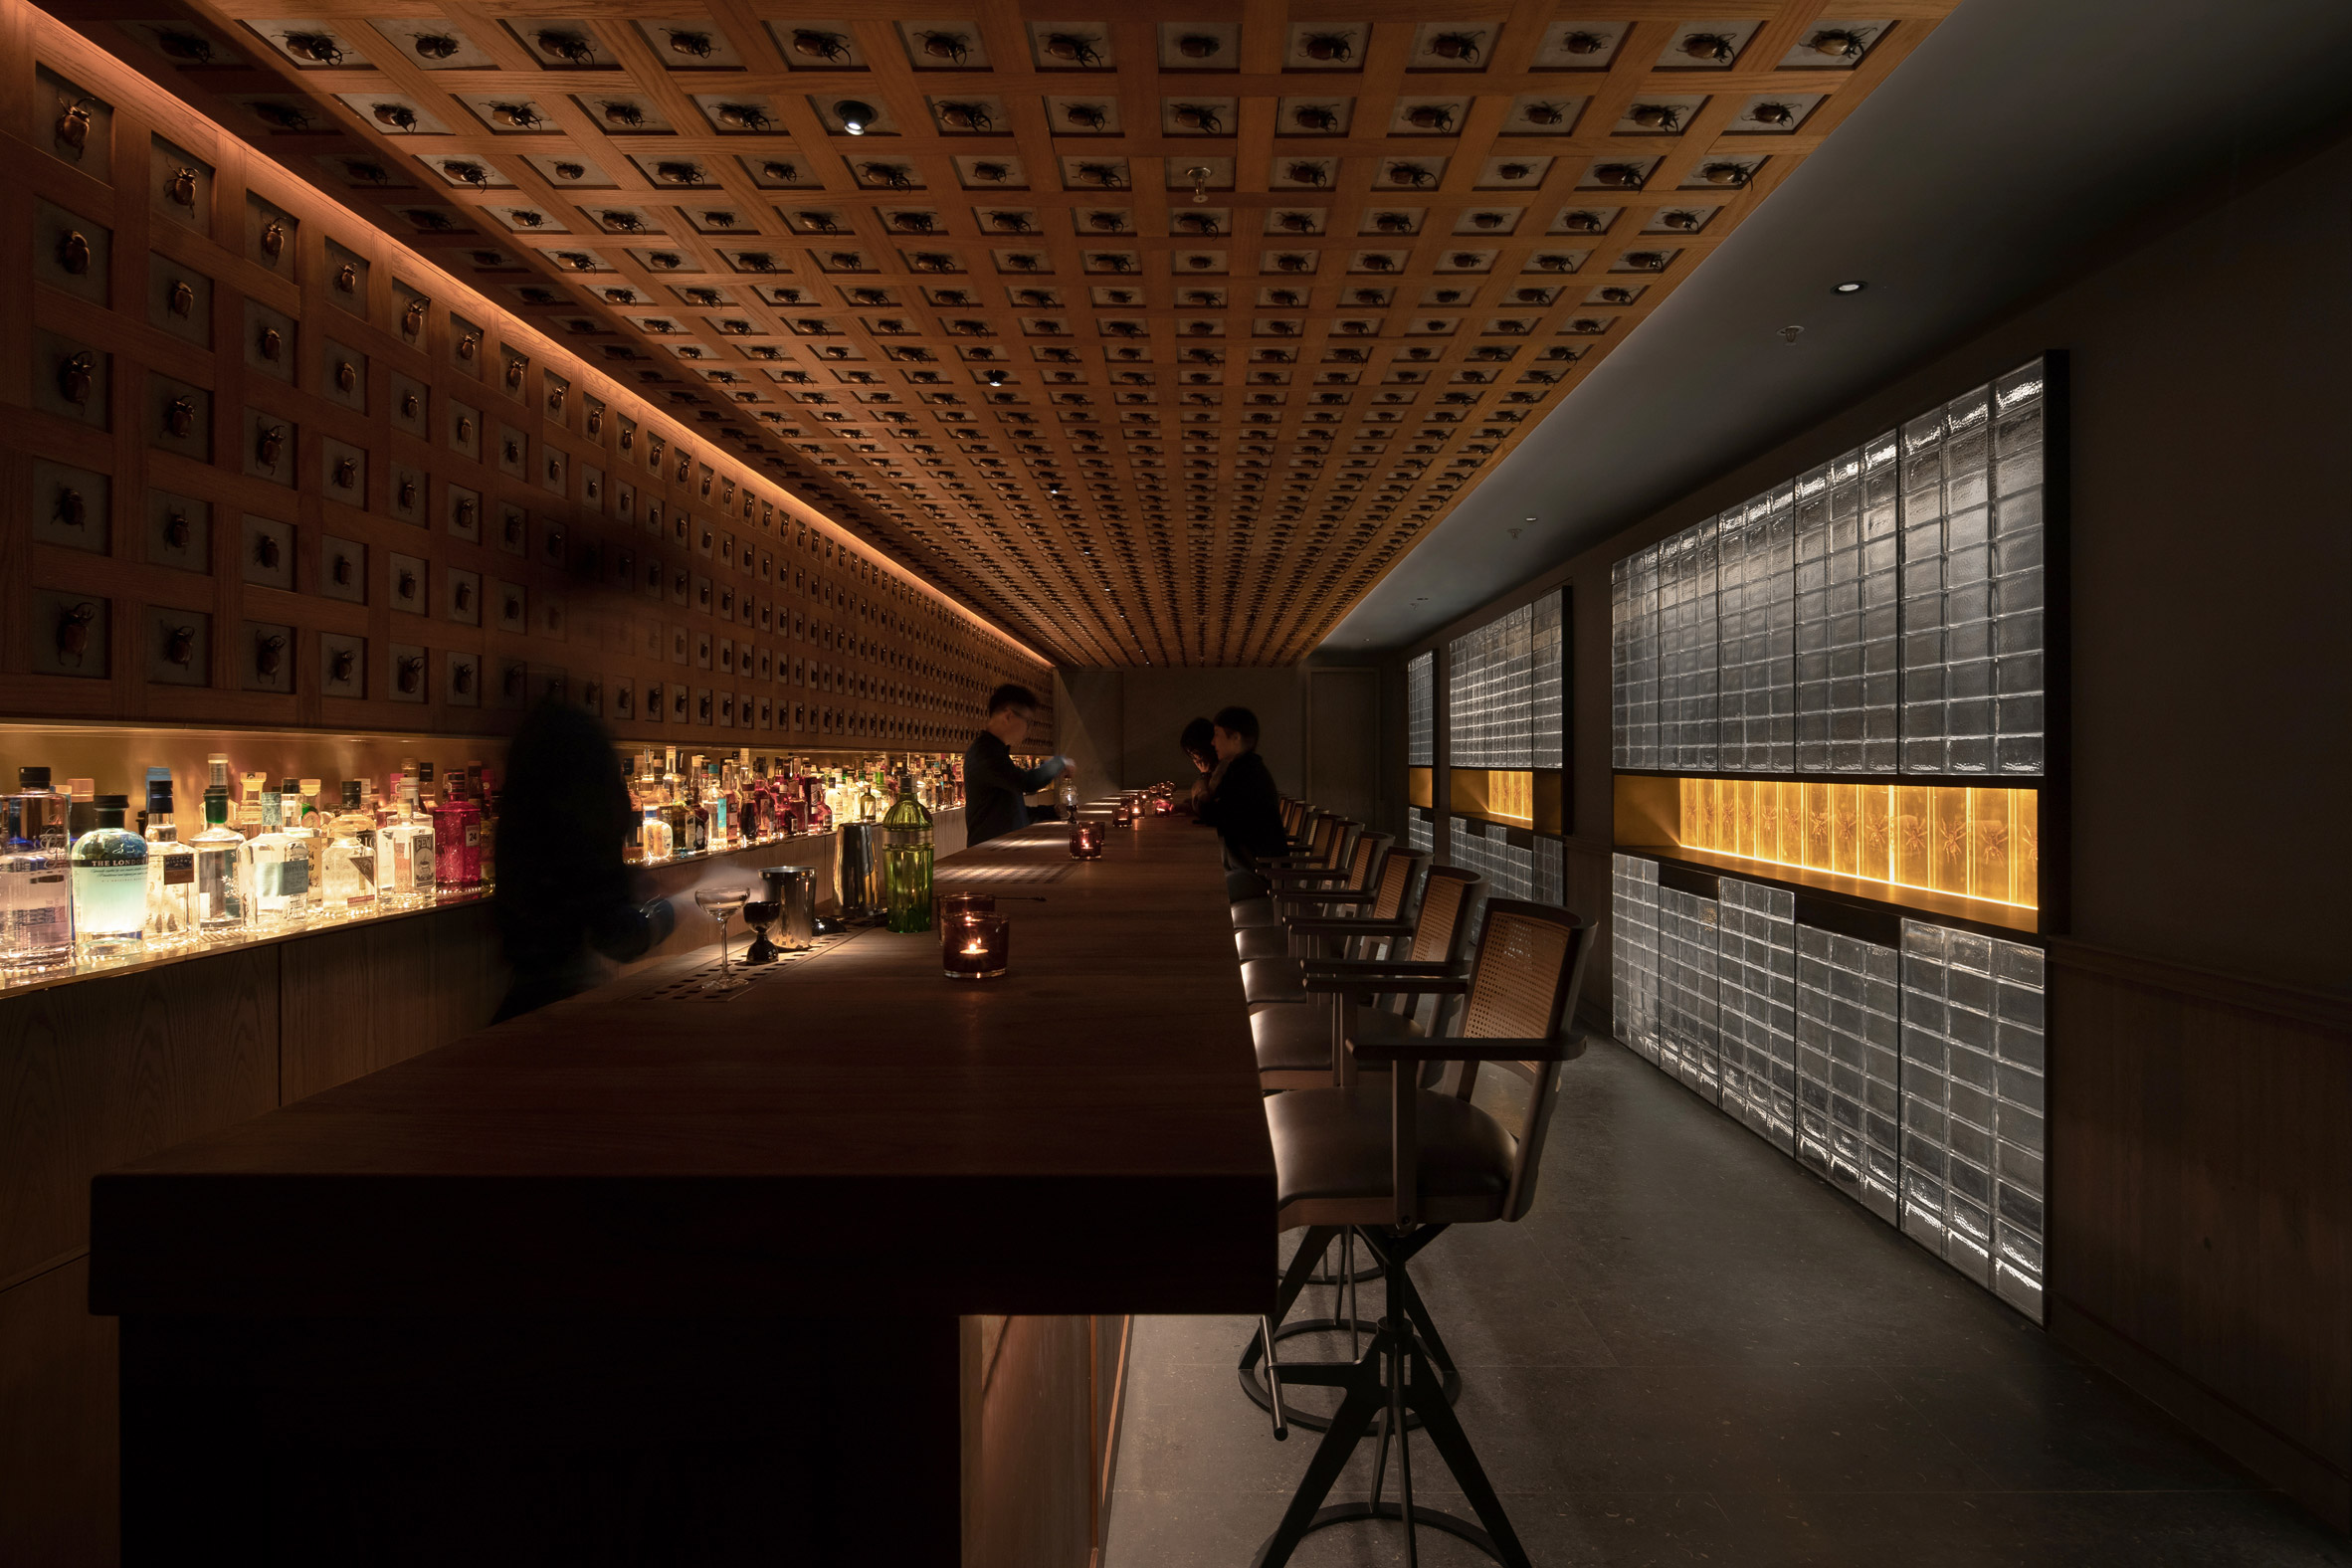 Beetles cover the walls and ceiling of J Boroski bar in Shanghai by Atelier XY